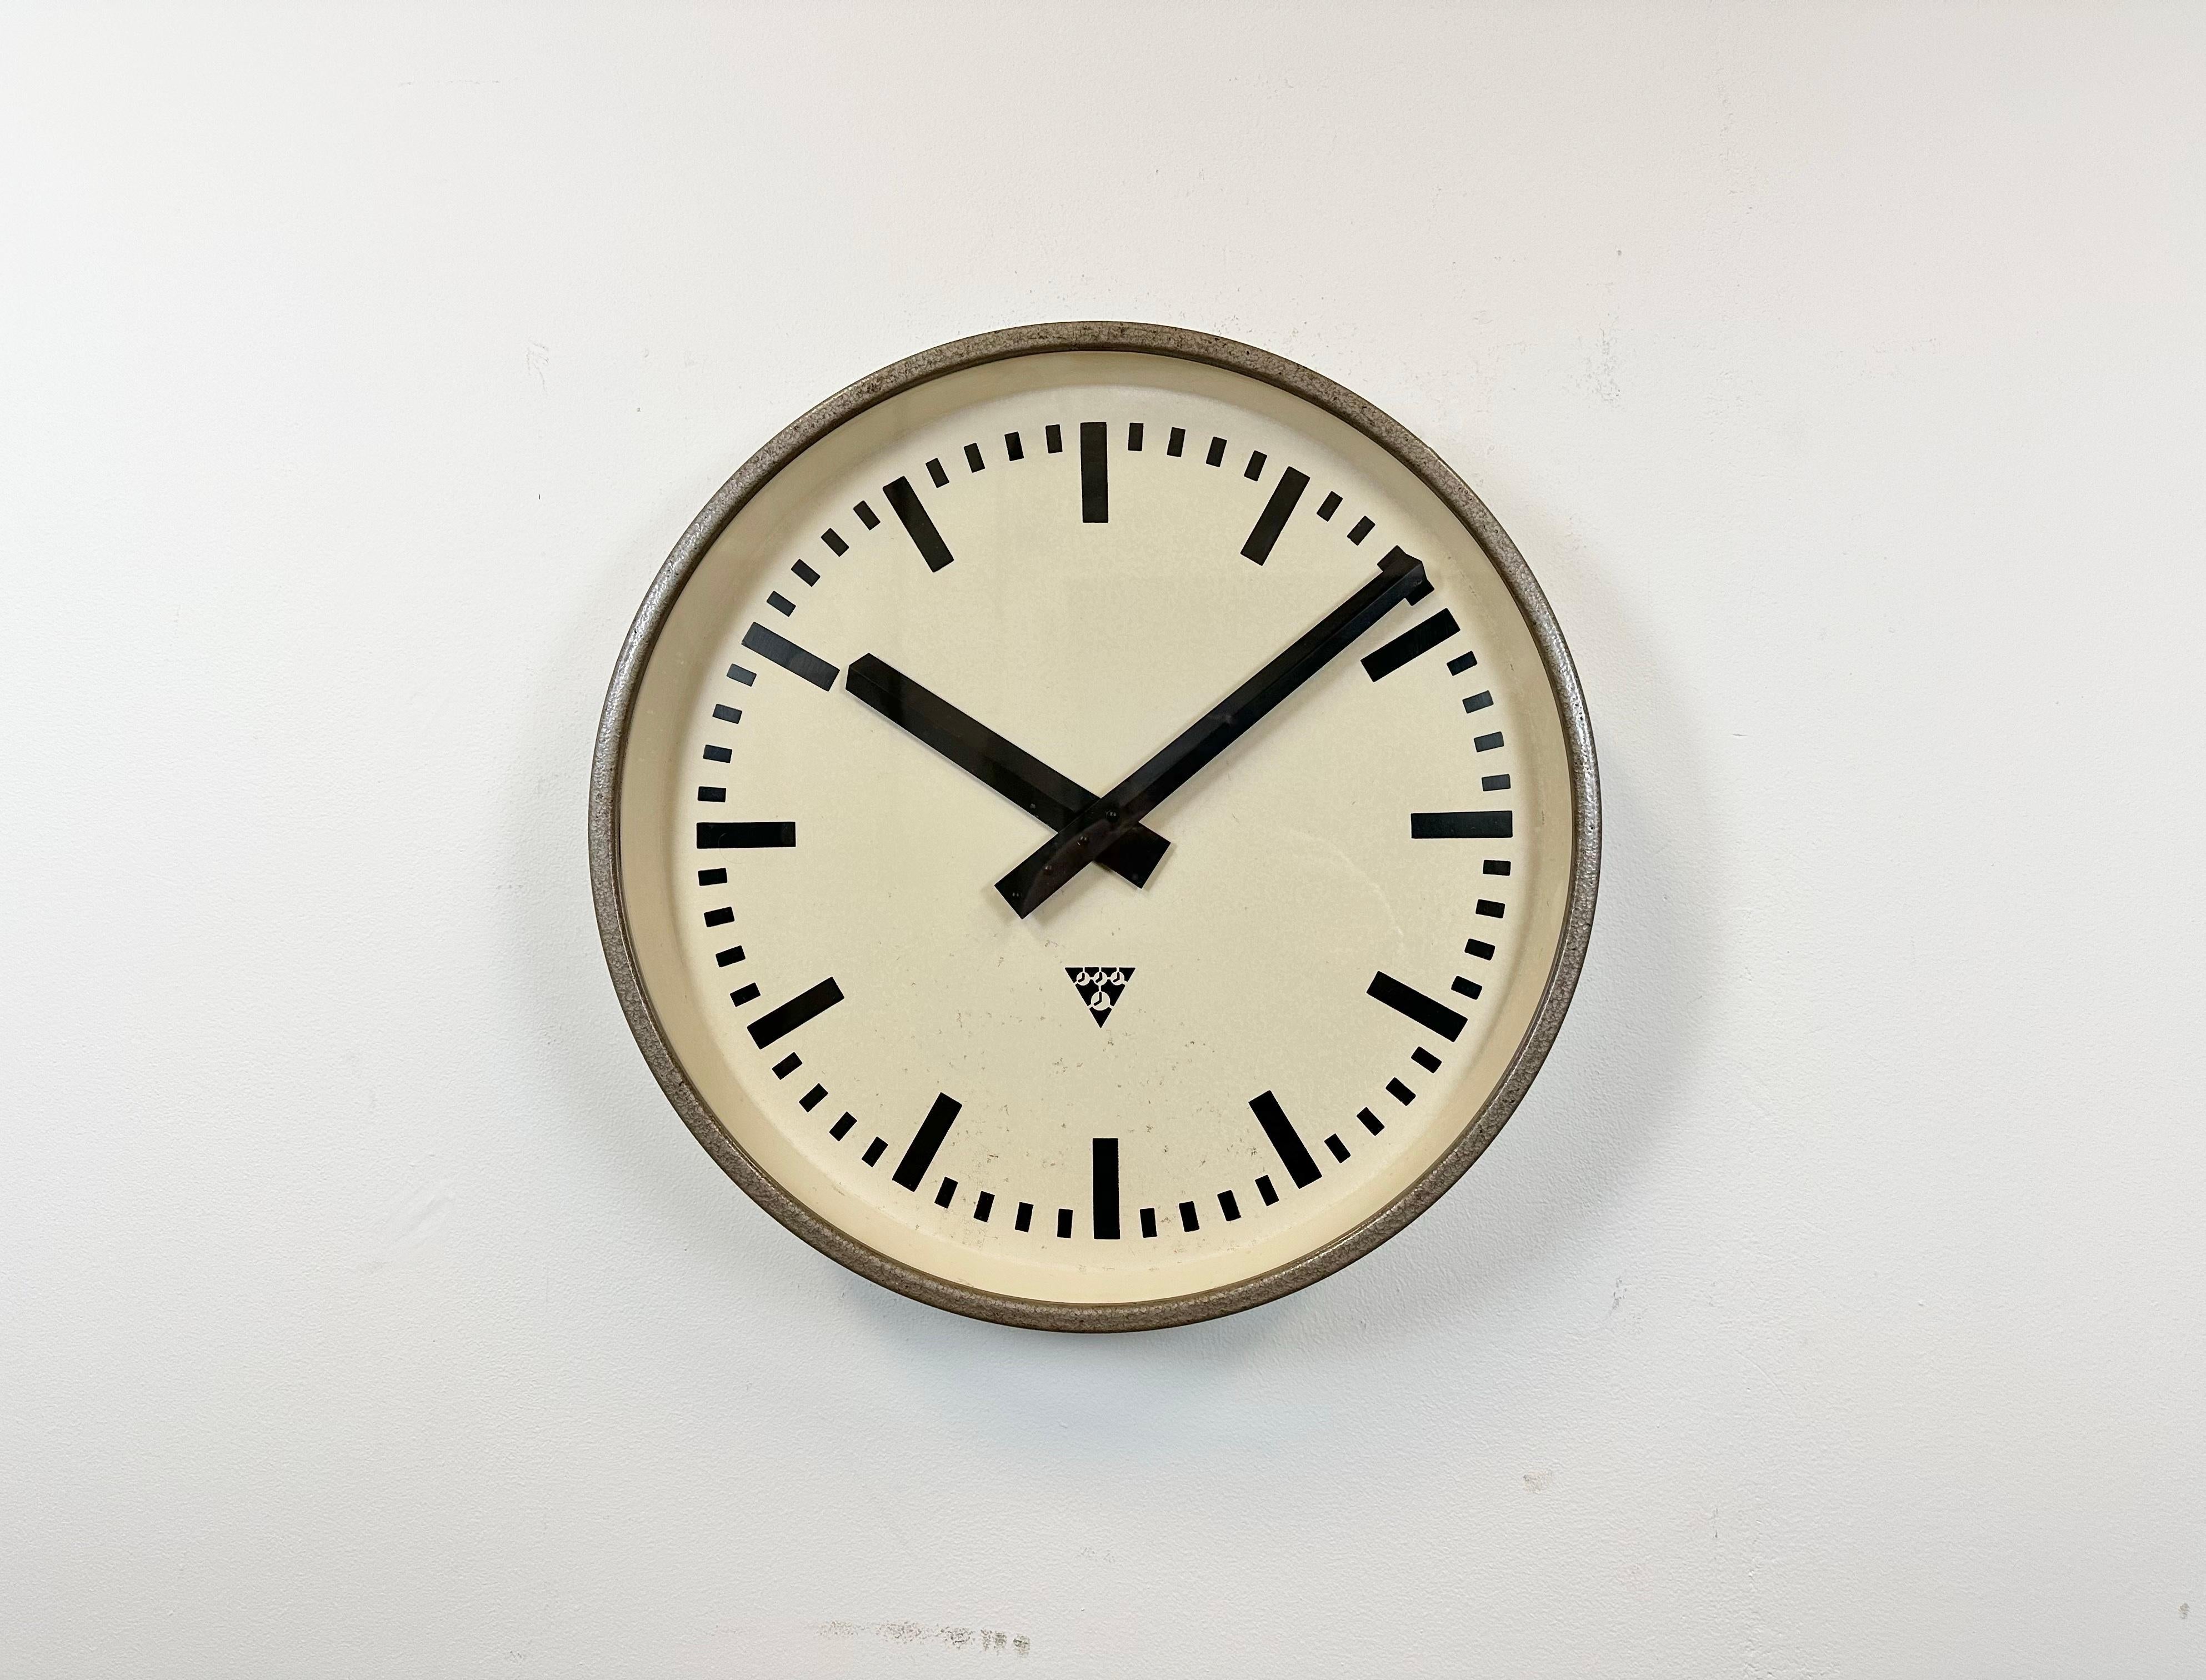 Pragotron wall clock made in former Czechoslovakia during the 1960s. It features a brown hammerpaint metal frame, a metal dial and a clear glass cover. The piece has been converted into a battery-powered clockwork and requires only one AA-battery.